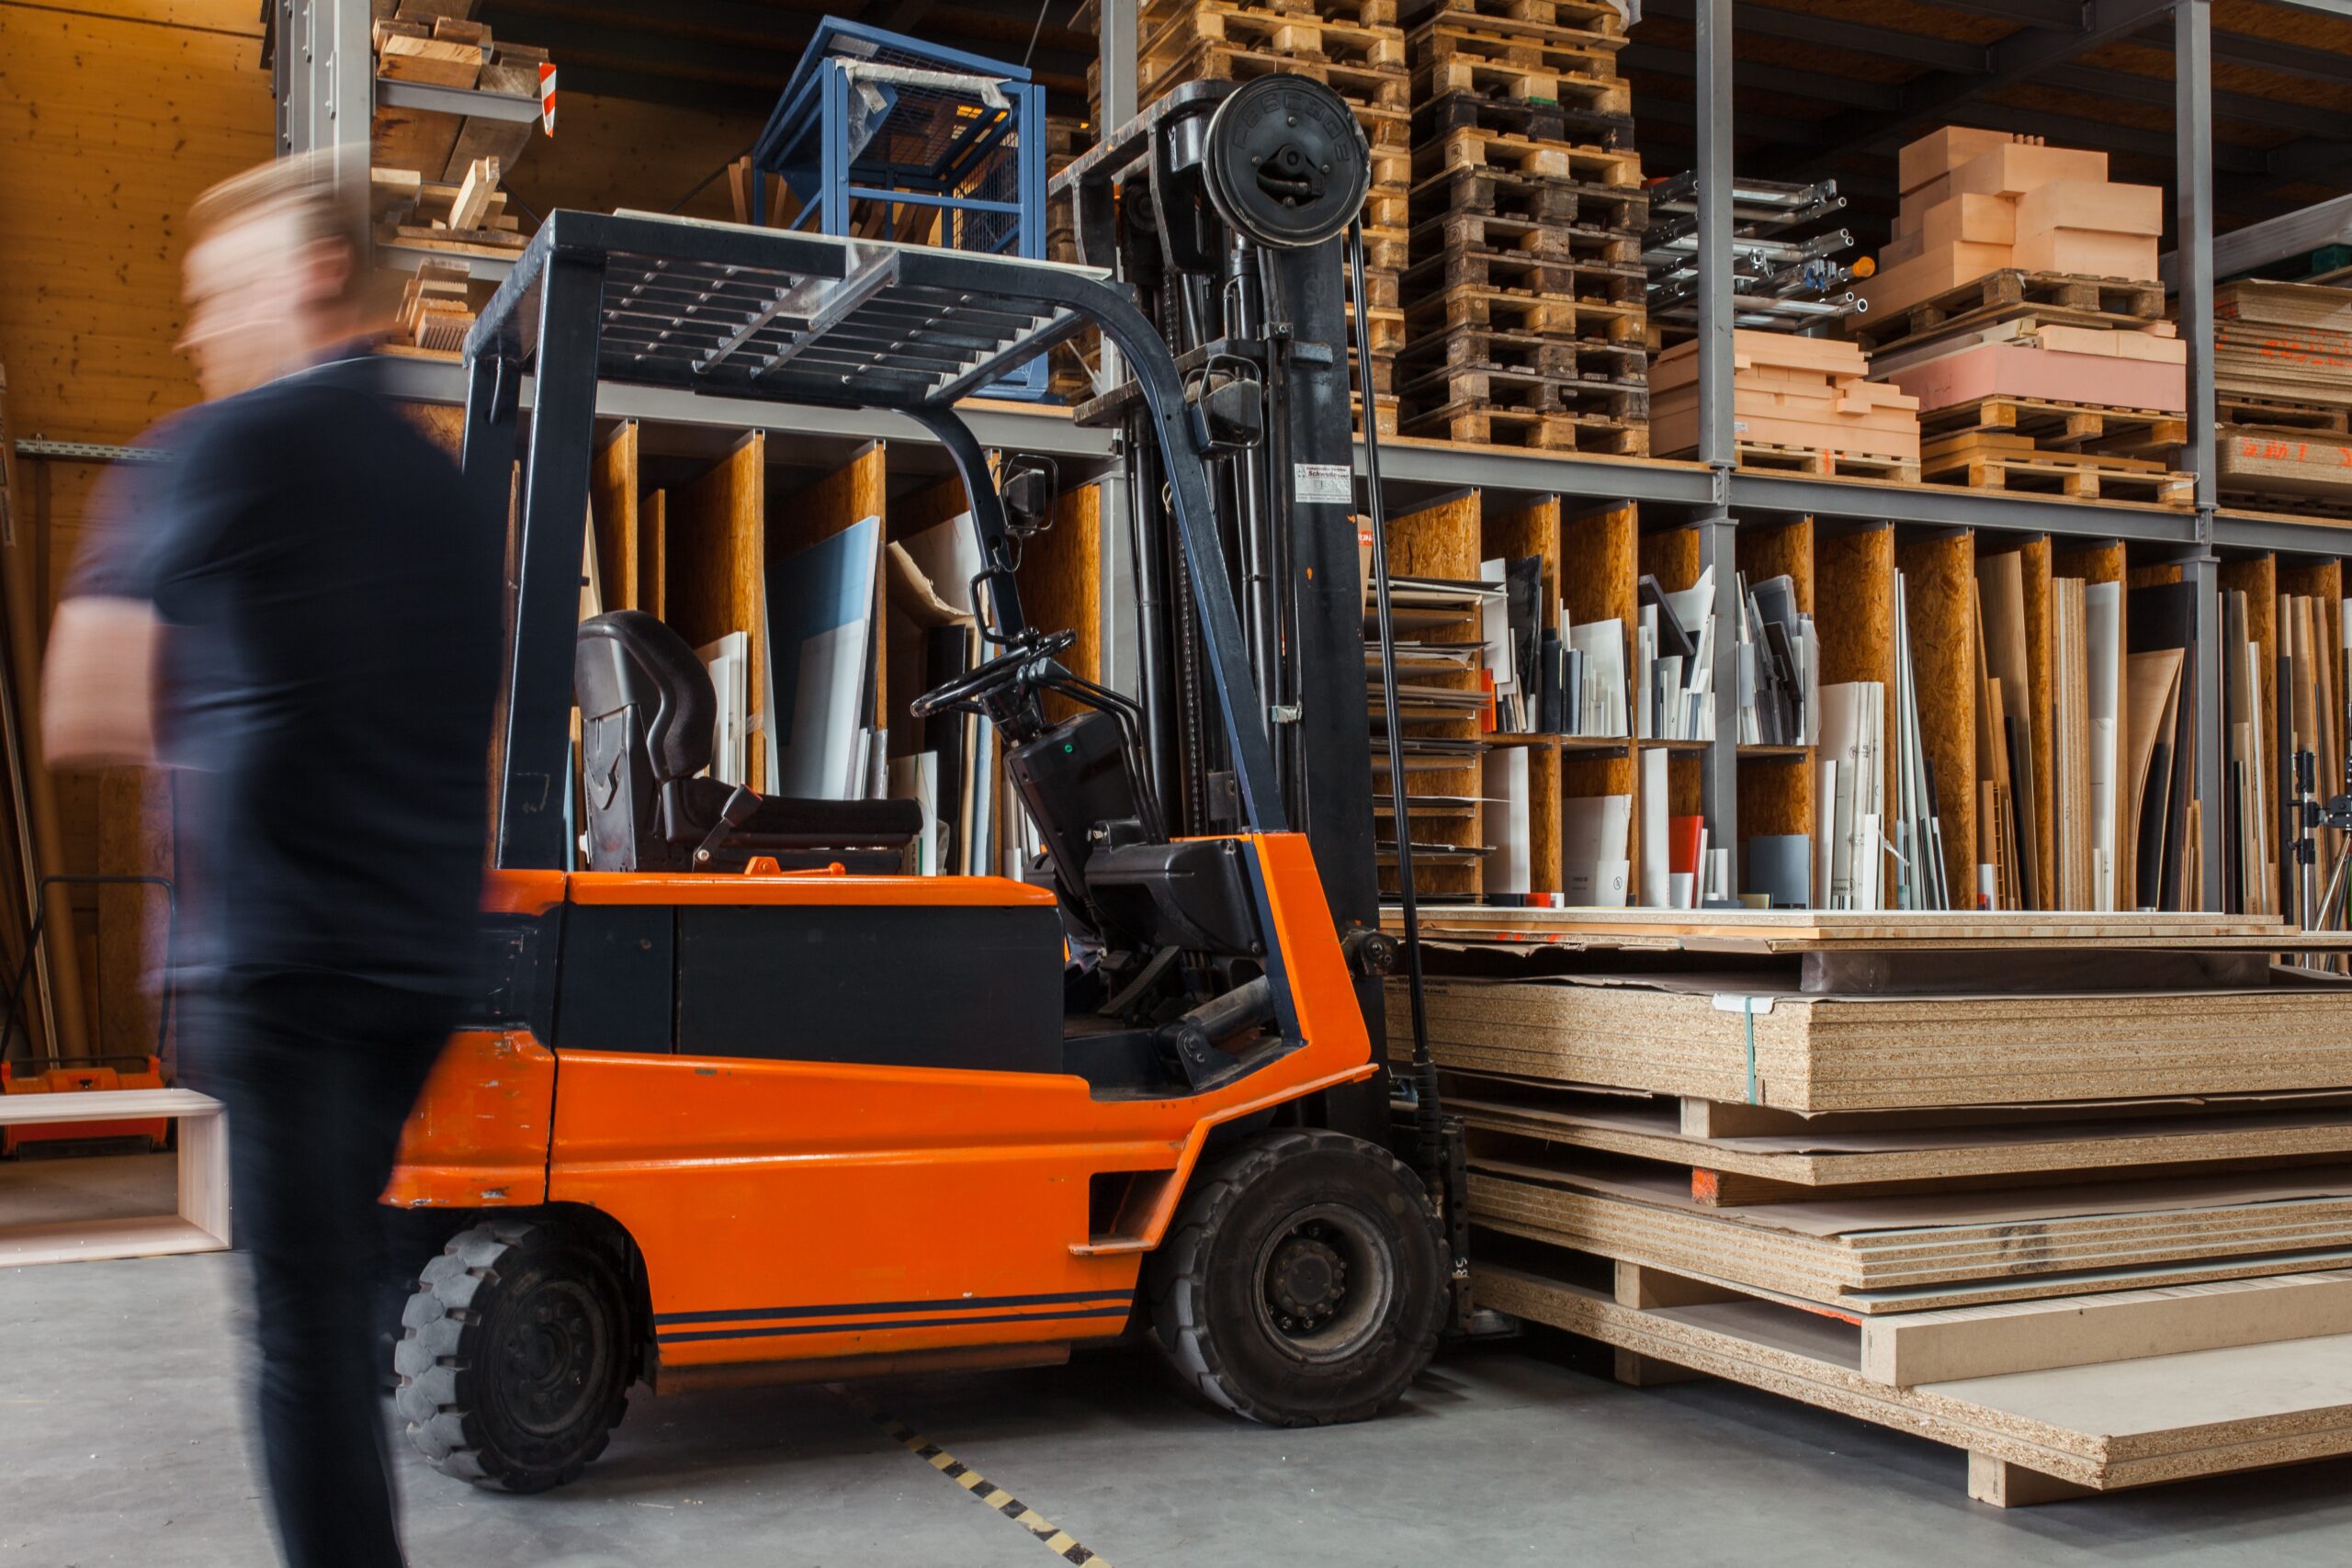 Maintaining proper inventory levels can have many positive effects on your operation.